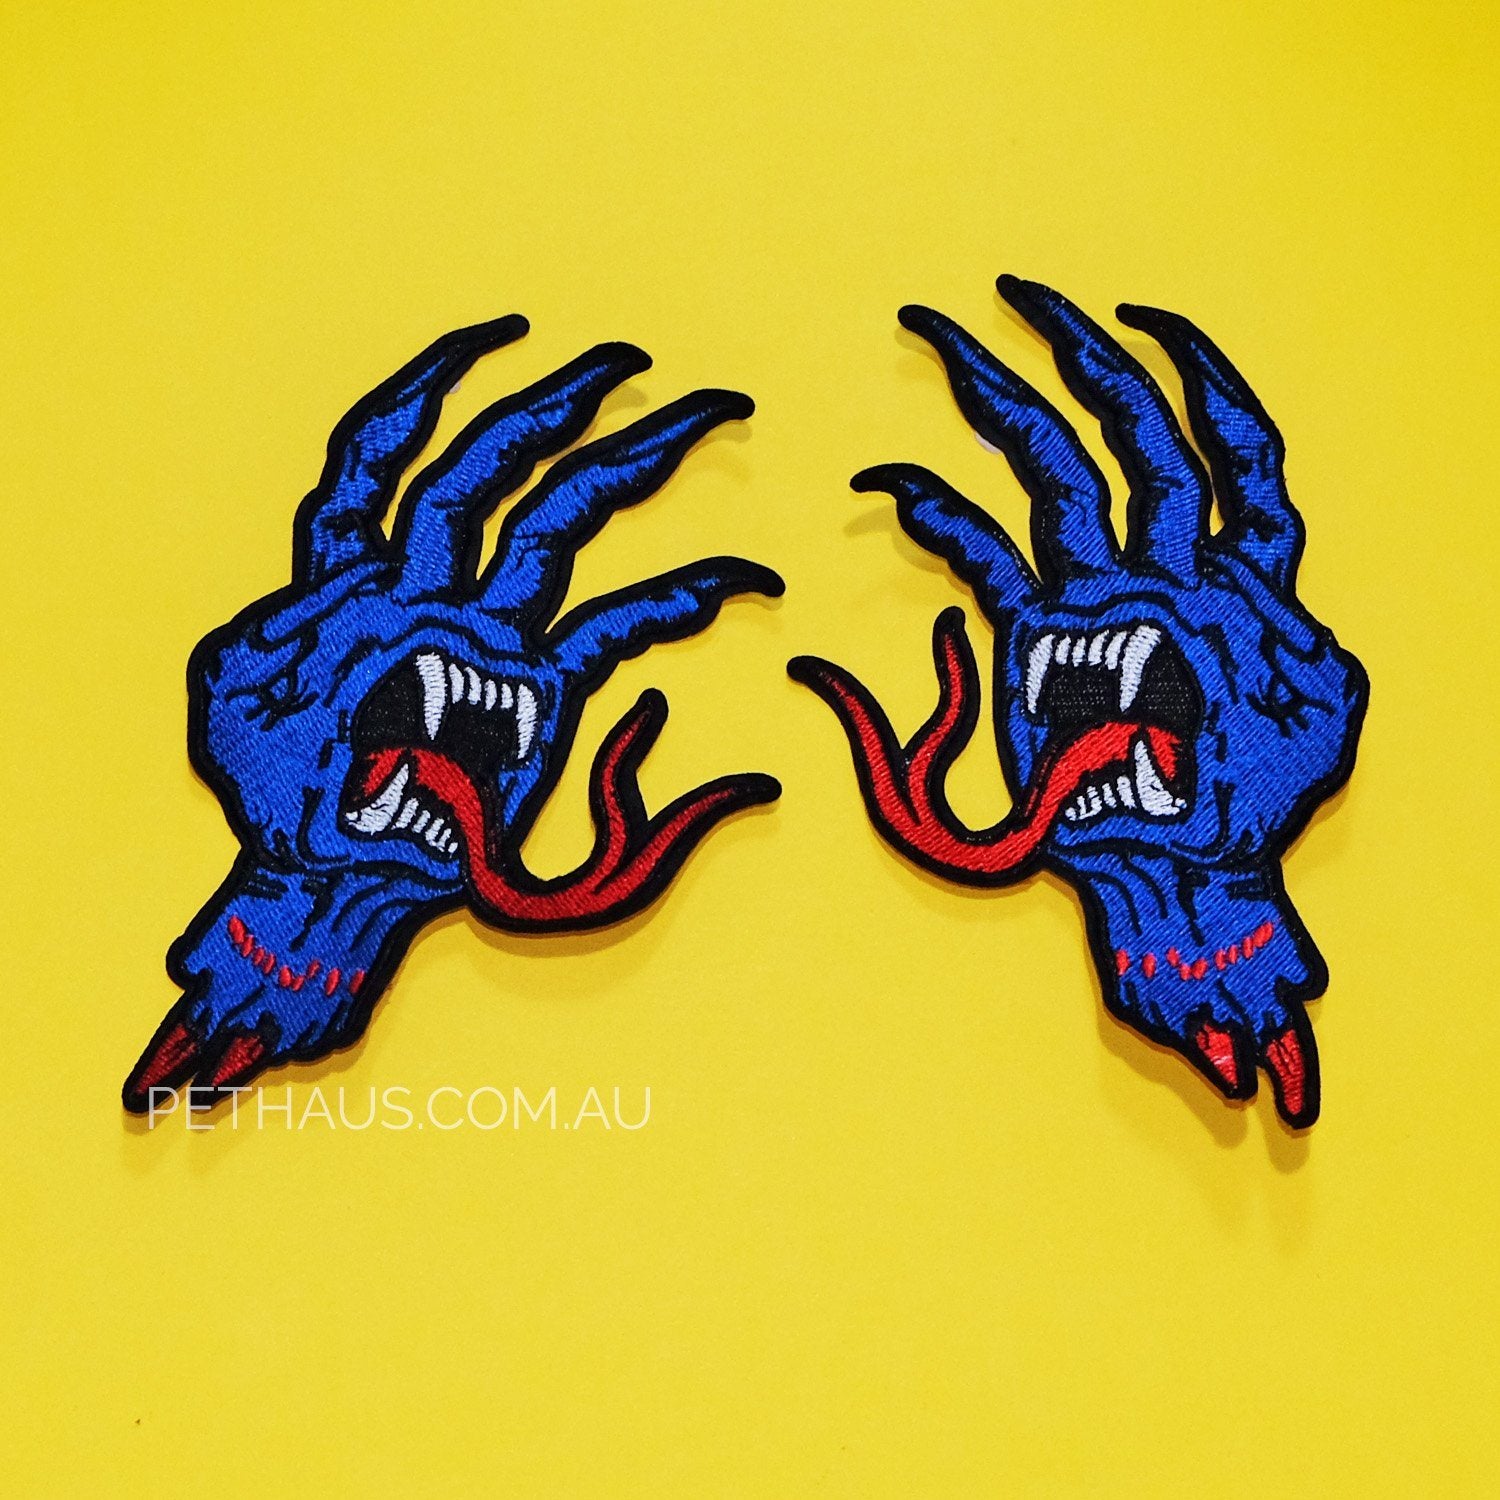 SCREAMING HAND PATCH, Skate Patch, Cool Patch, hand patch, snake tongue